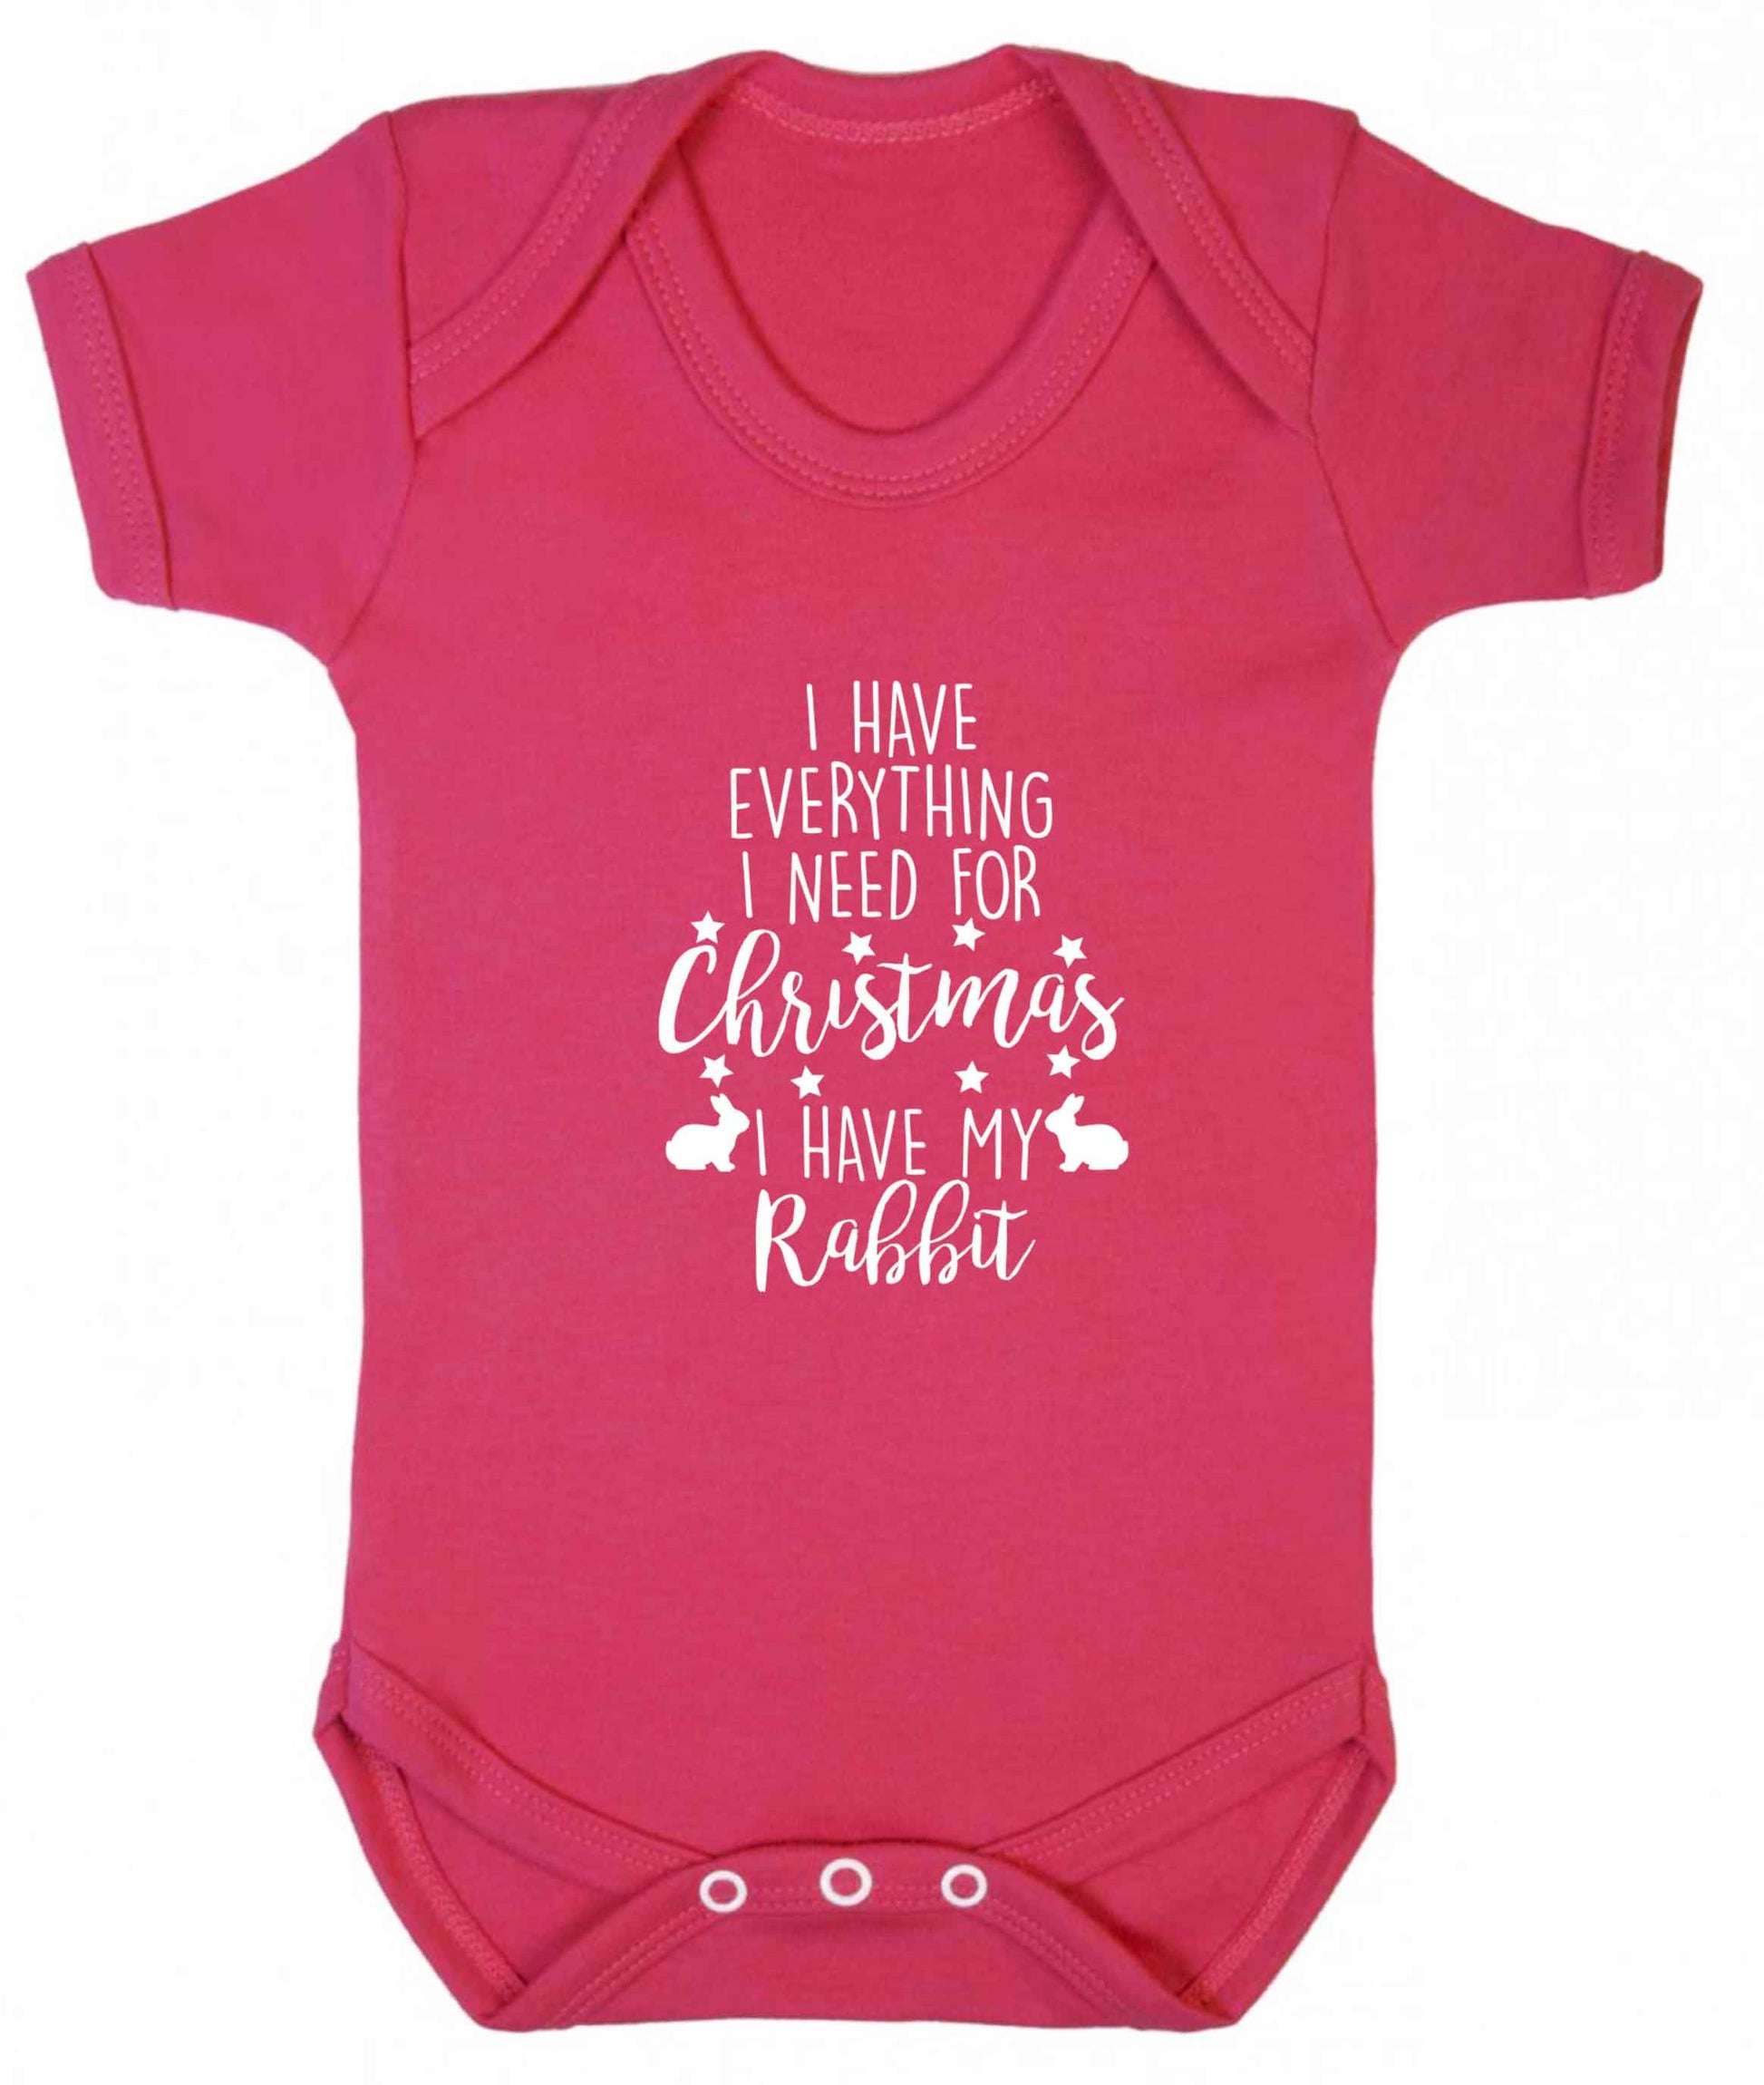 I have everything I need for Christmas I have my rabbit baby vest dark pink 18-24 months